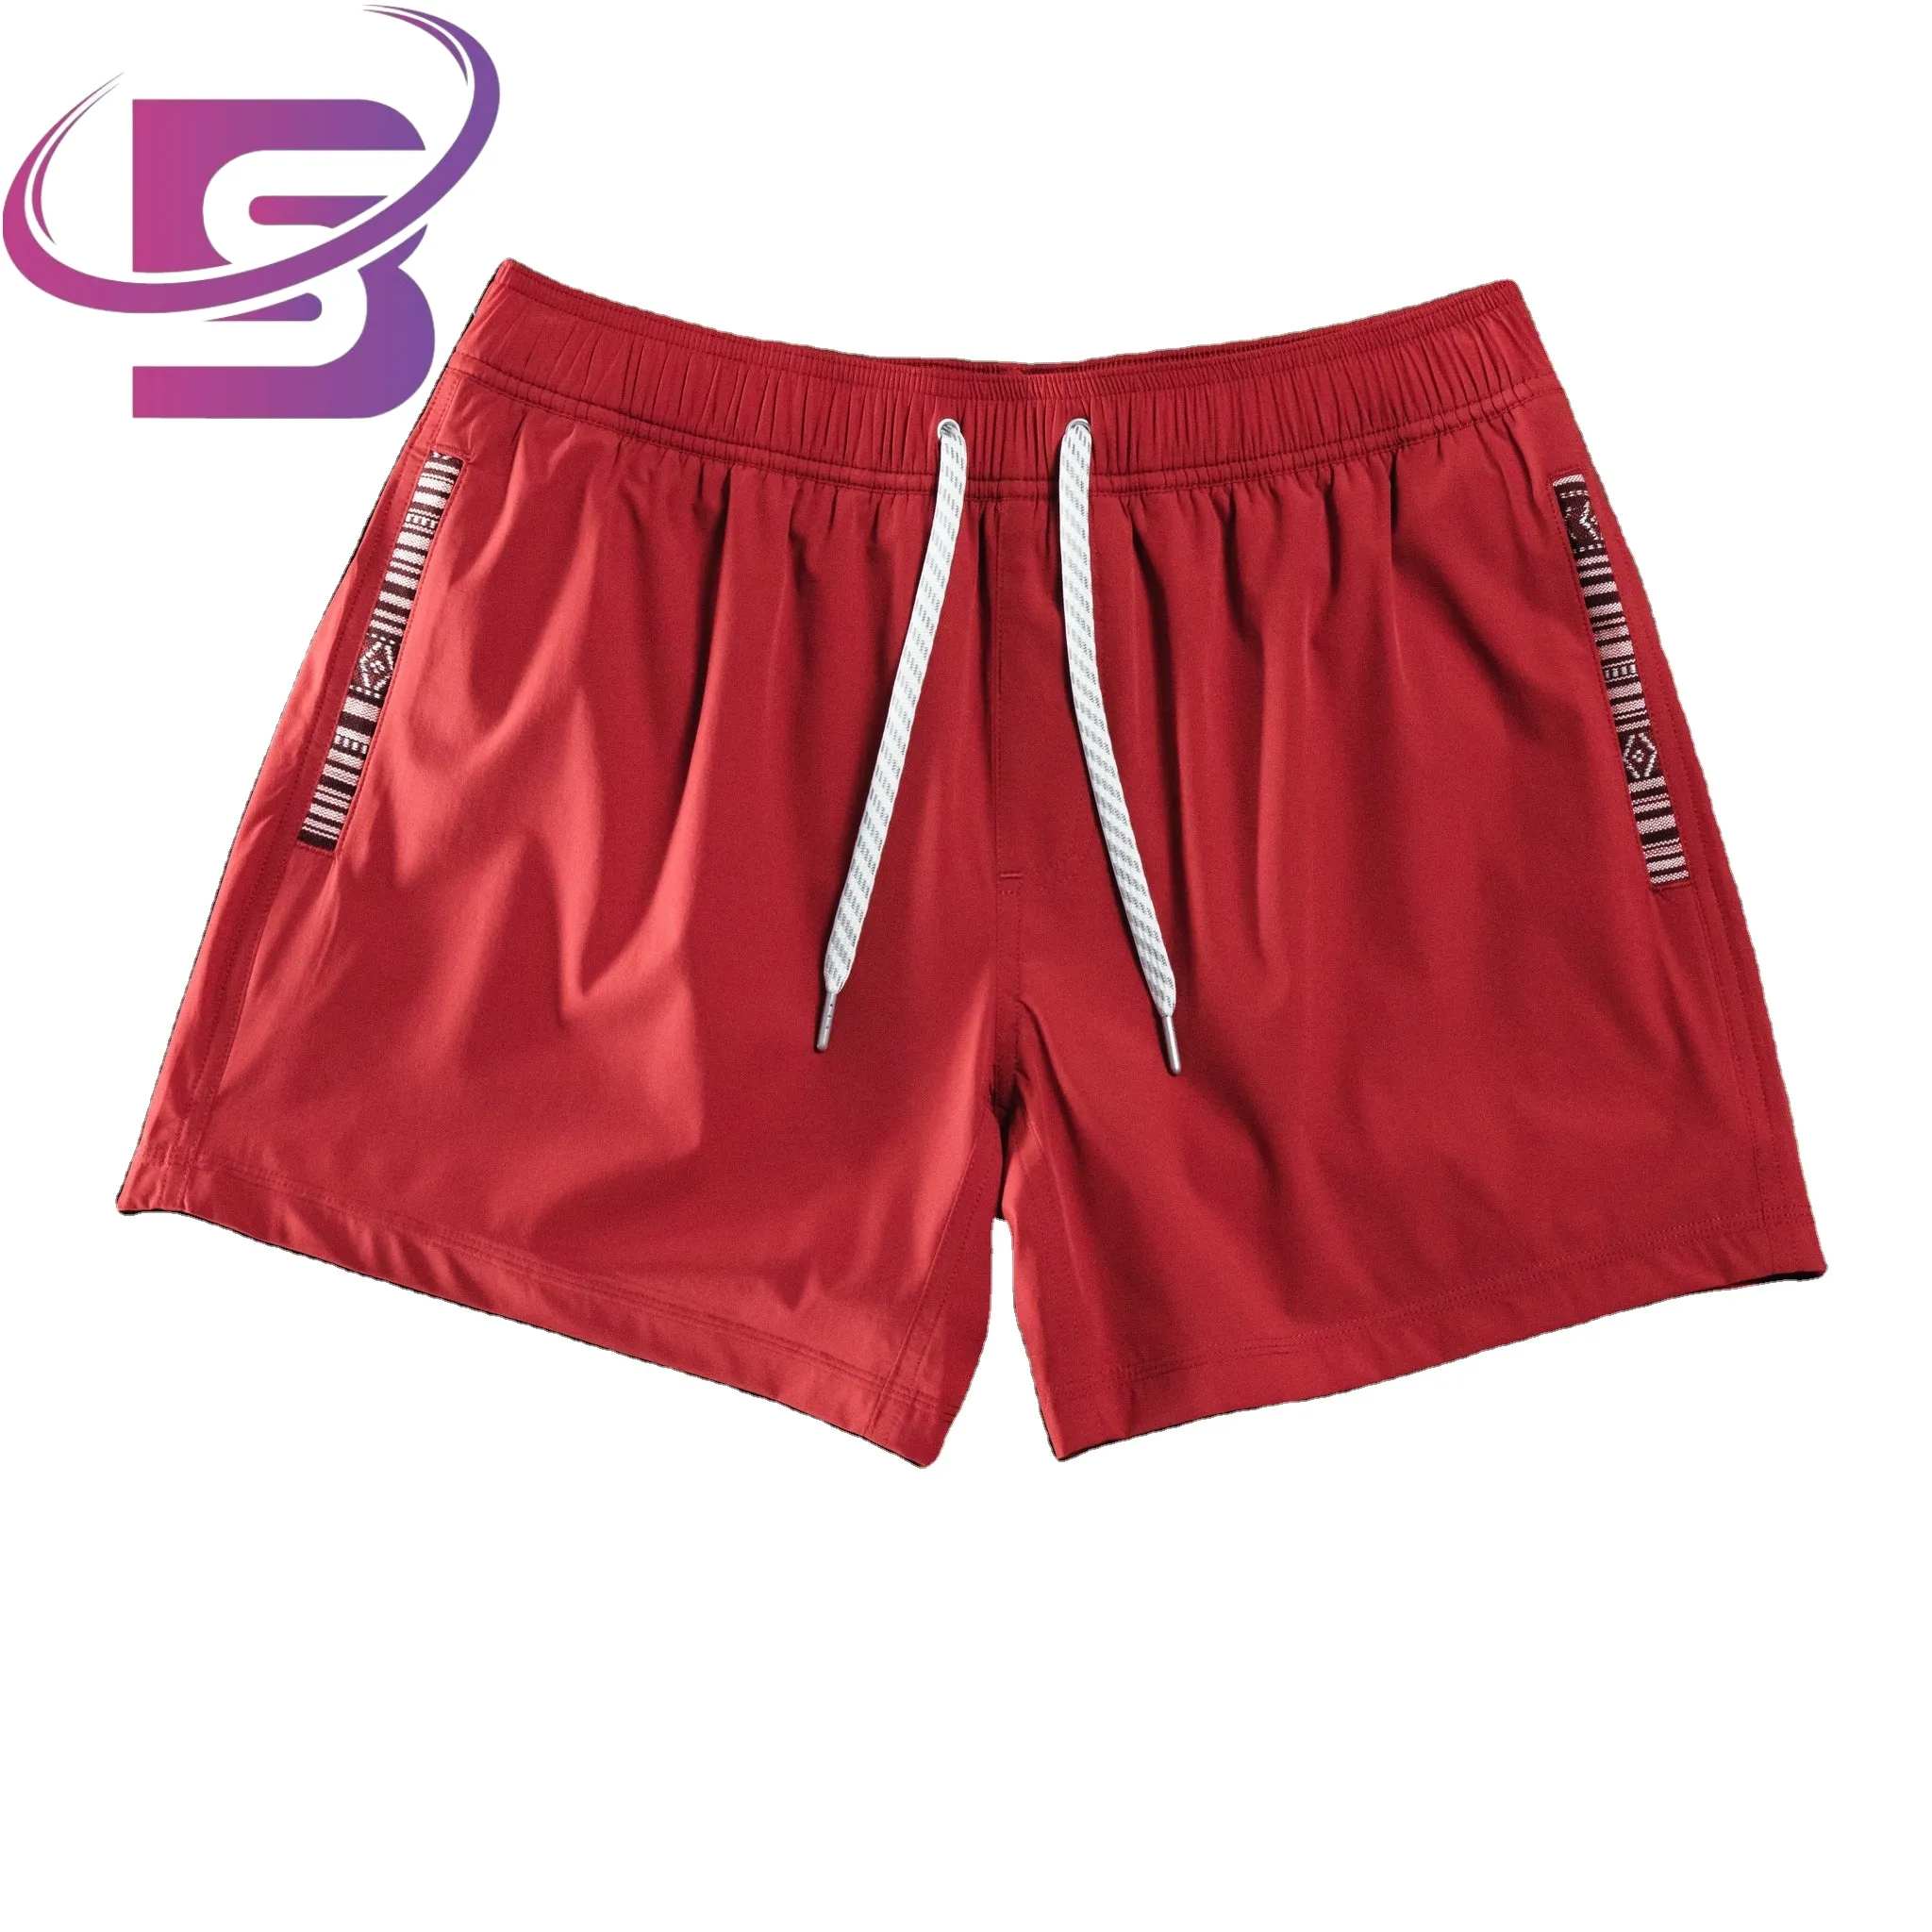 China factory direct sale stretch polyester spandex custom Men's Athletic Board Short Swimming Beach Shorts for Men